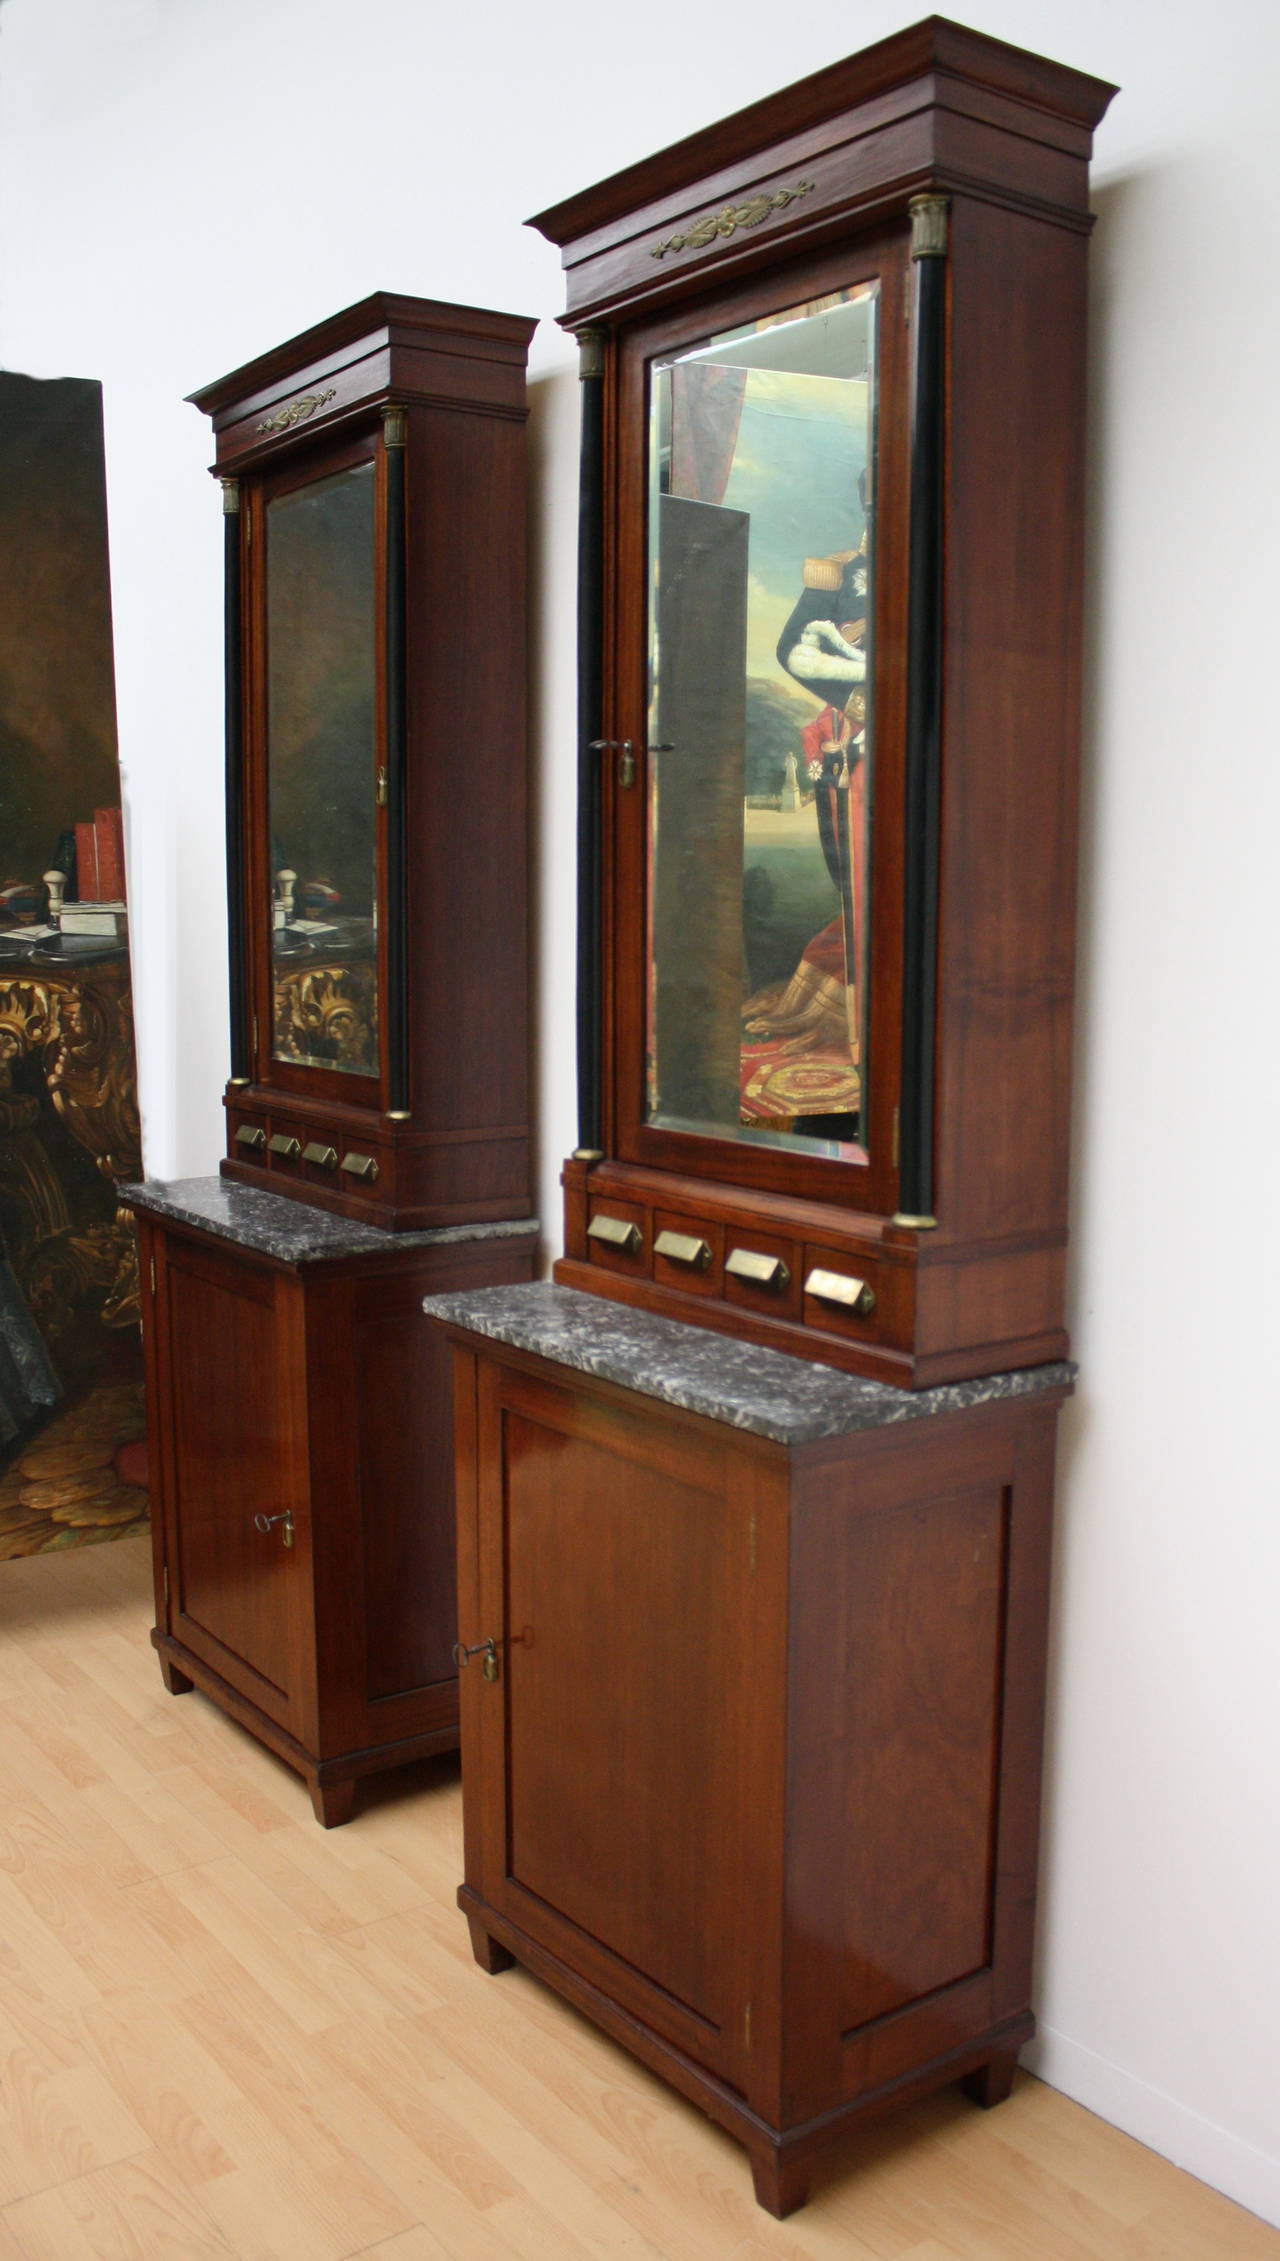 19th Century, Pair of Biedermeier Apothecary Cabinet In Good Condition For Sale In Wels, AT